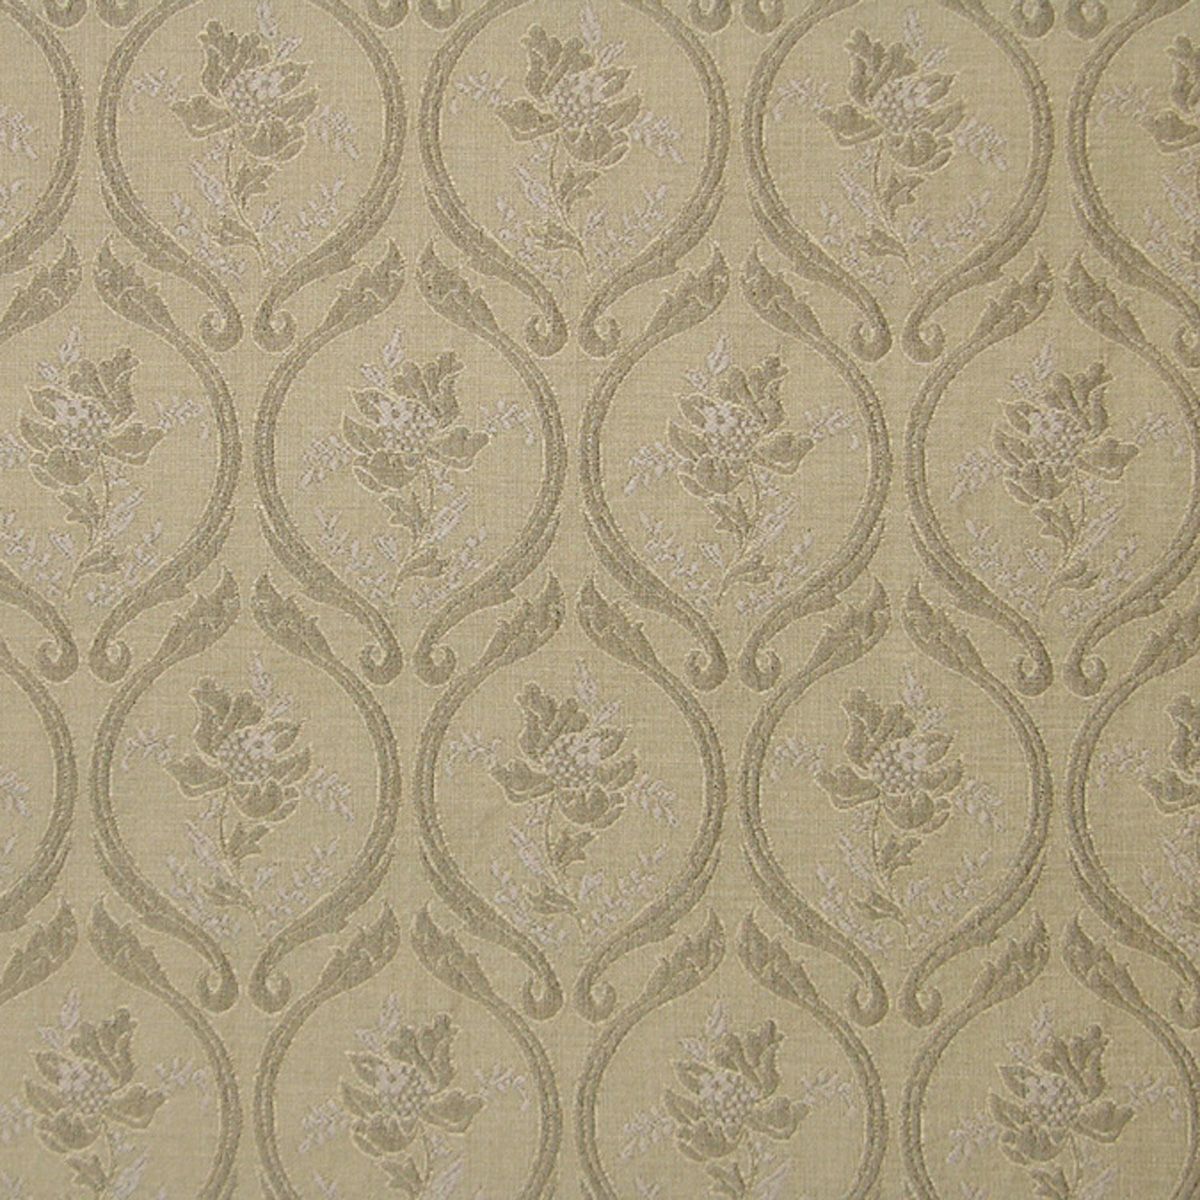 Fairholme fabric in mauves color - pattern number PQ 00021530 - by Scalamandre in the Old World Weavers collection